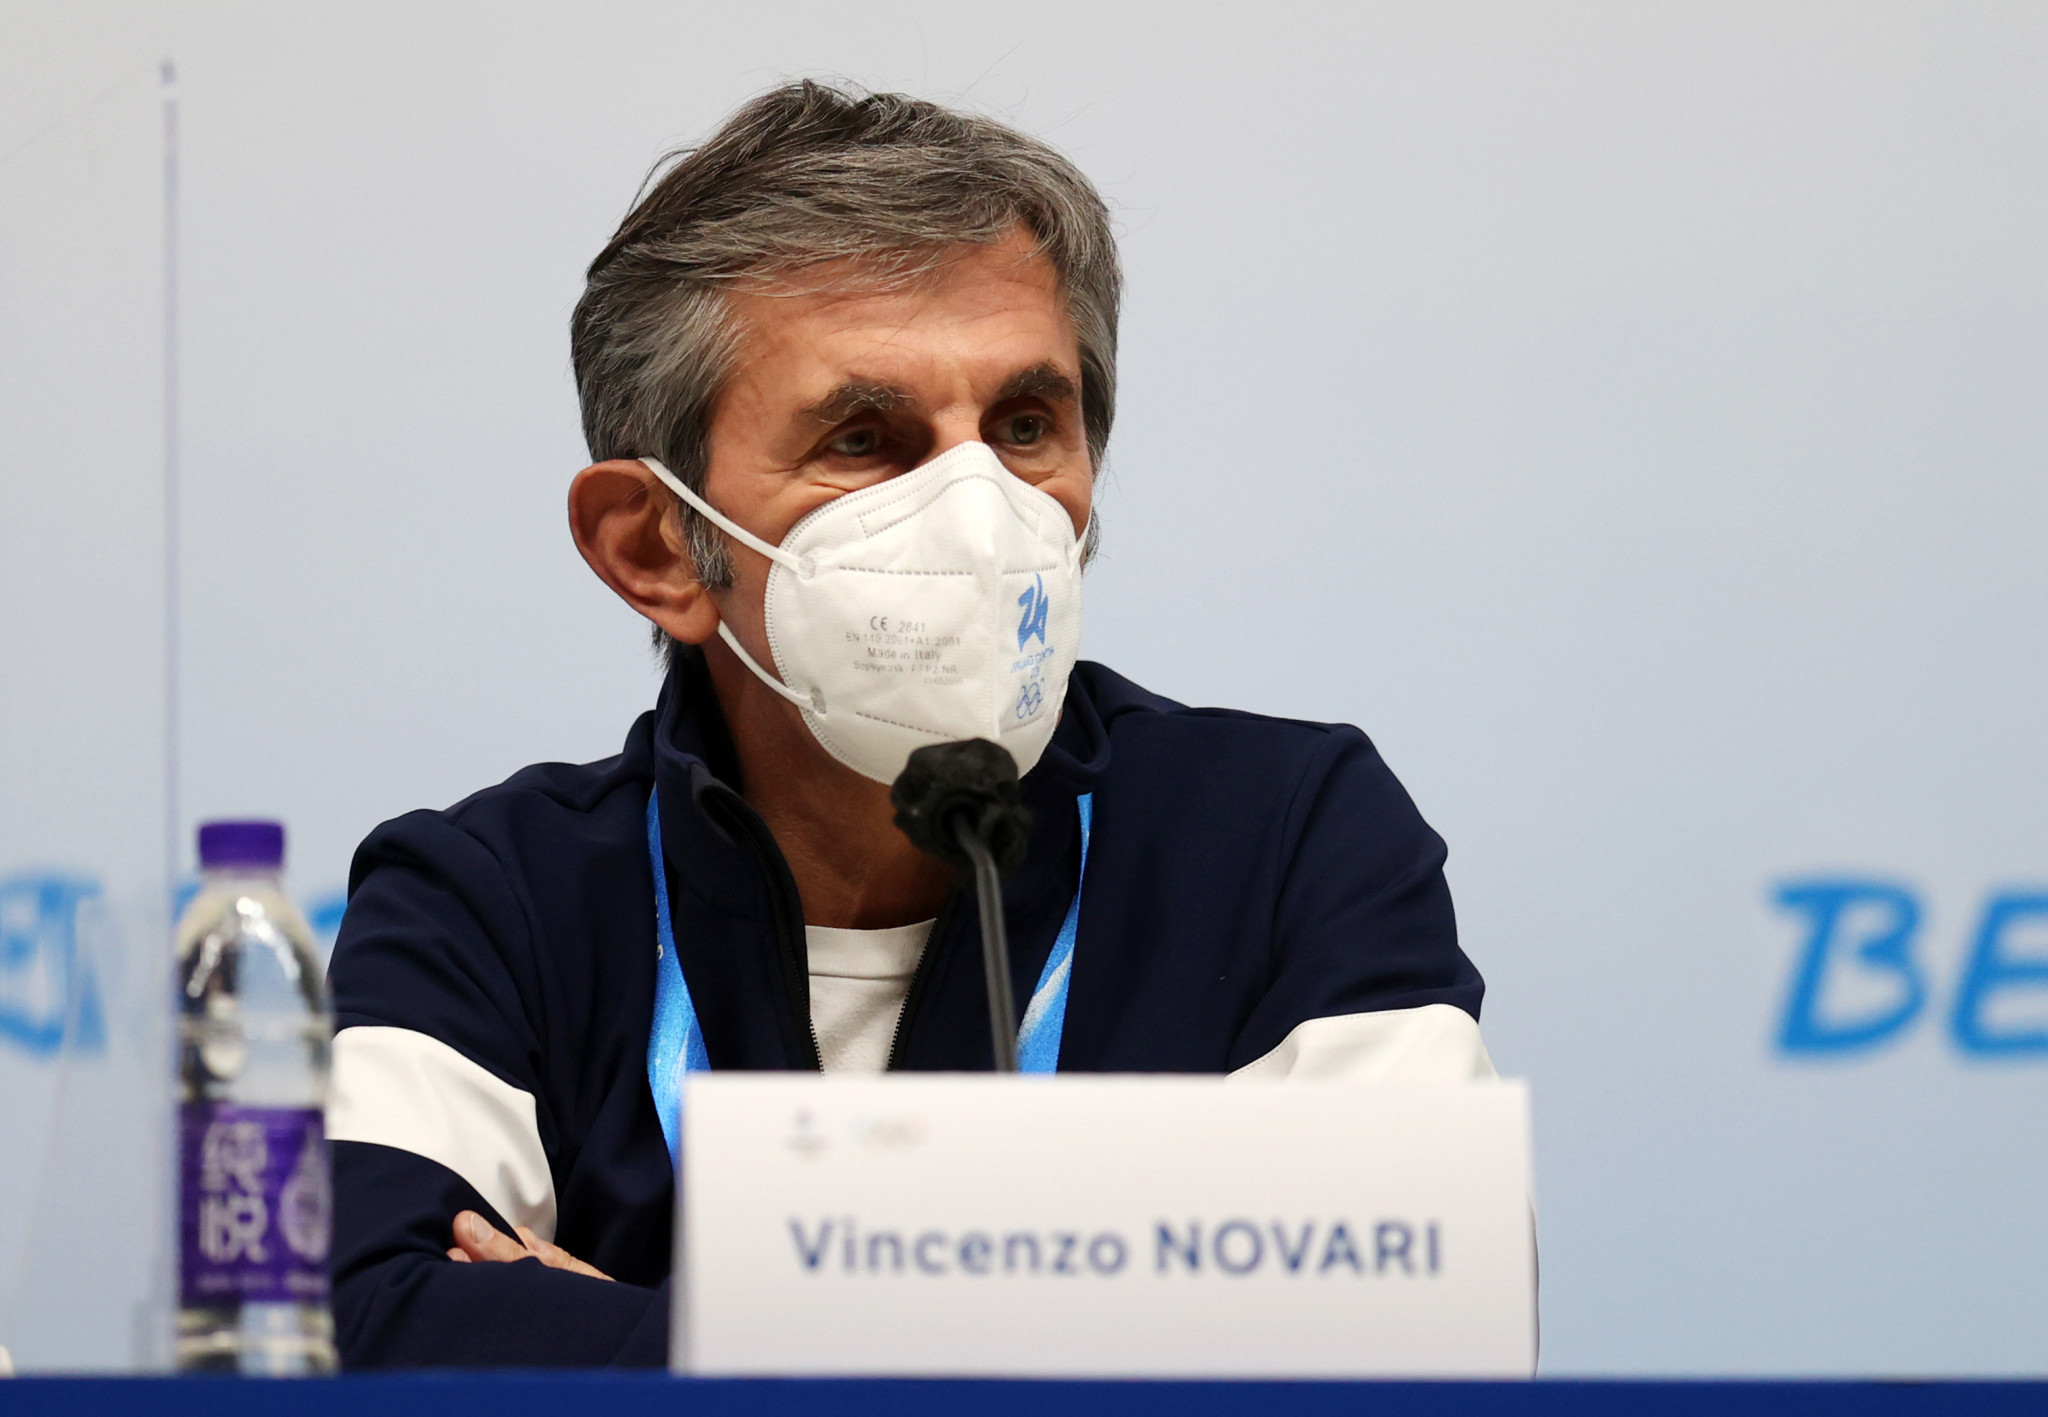 Changes including the replacement of Vincenzo Novari as chief executive are expected at Milan Cortina 2026 after the Italian general election ©Getty Images